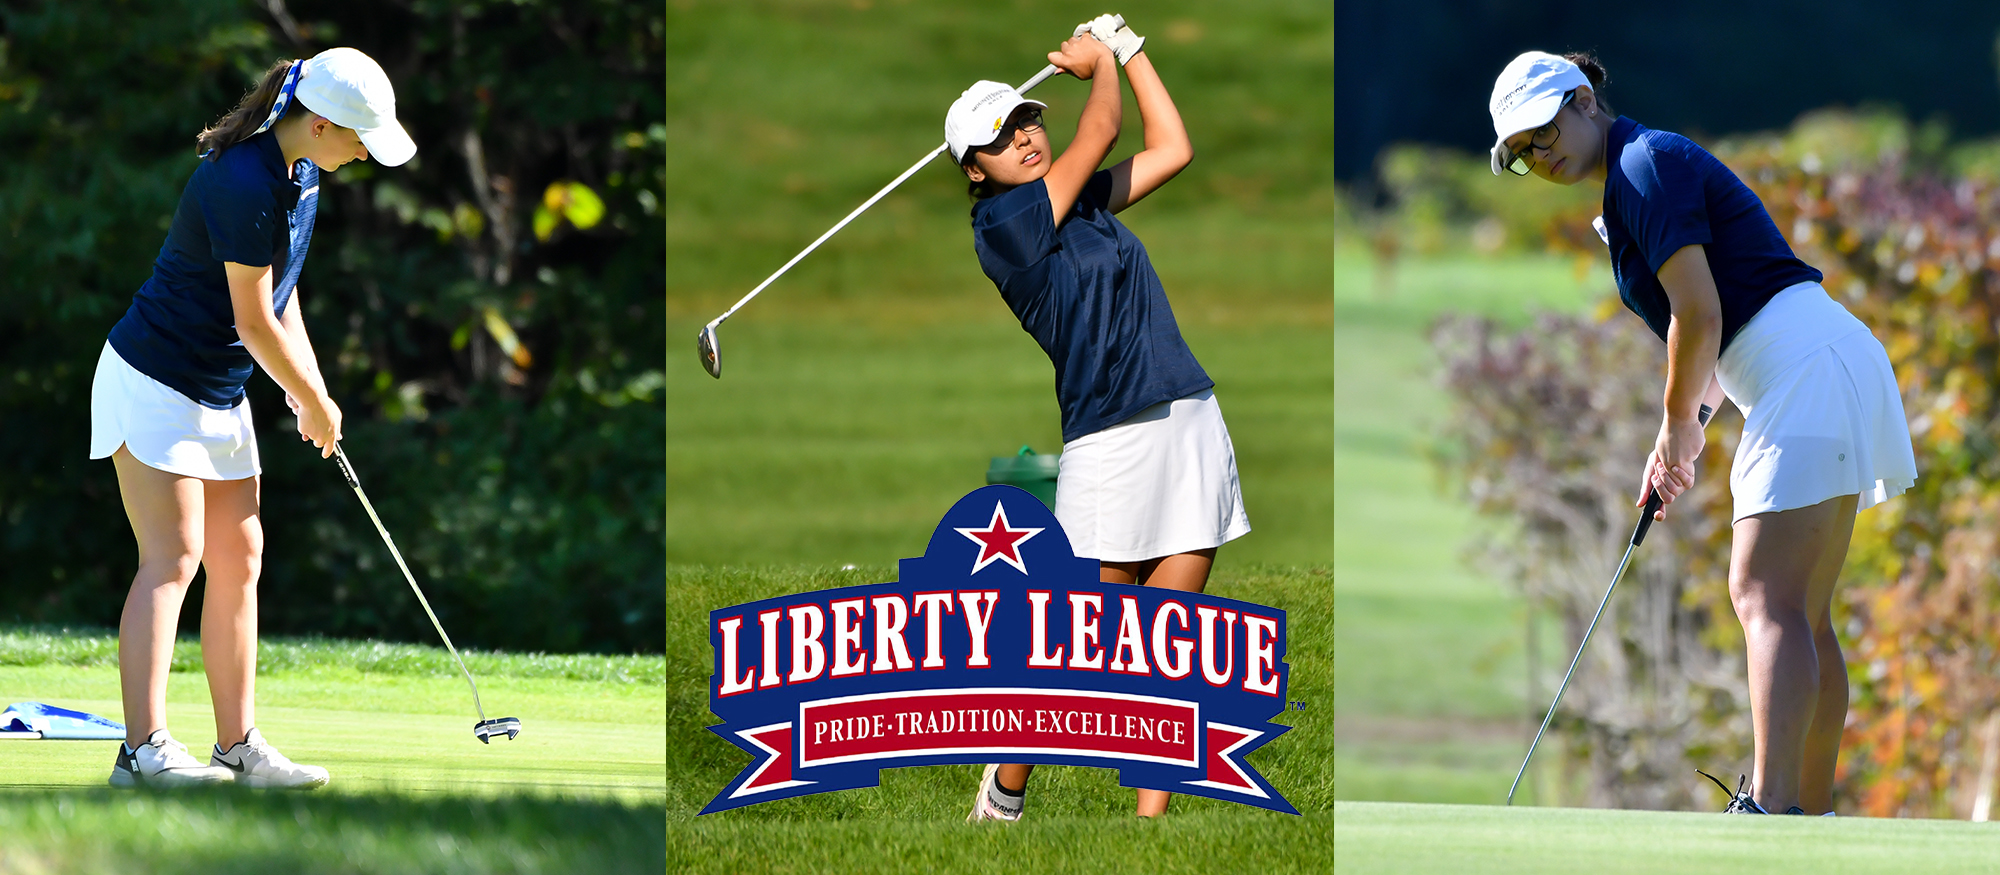 Andrian, Delaney, Spitzer Named to Liberty League Women's Golf All-Academic Team